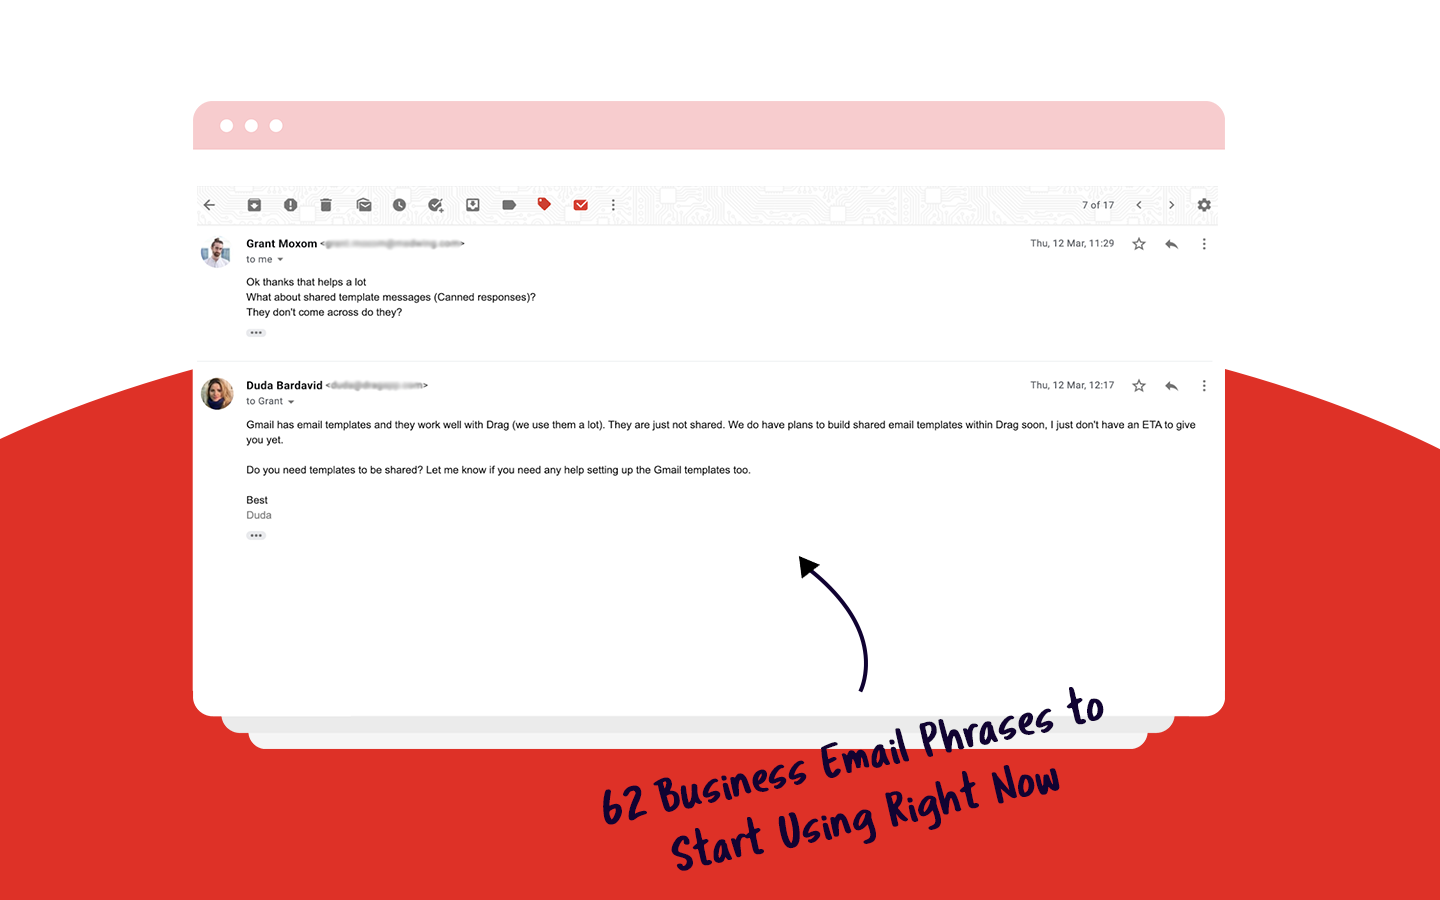 30 Business Email Phrases to Start Using Right Now  DragApp.com